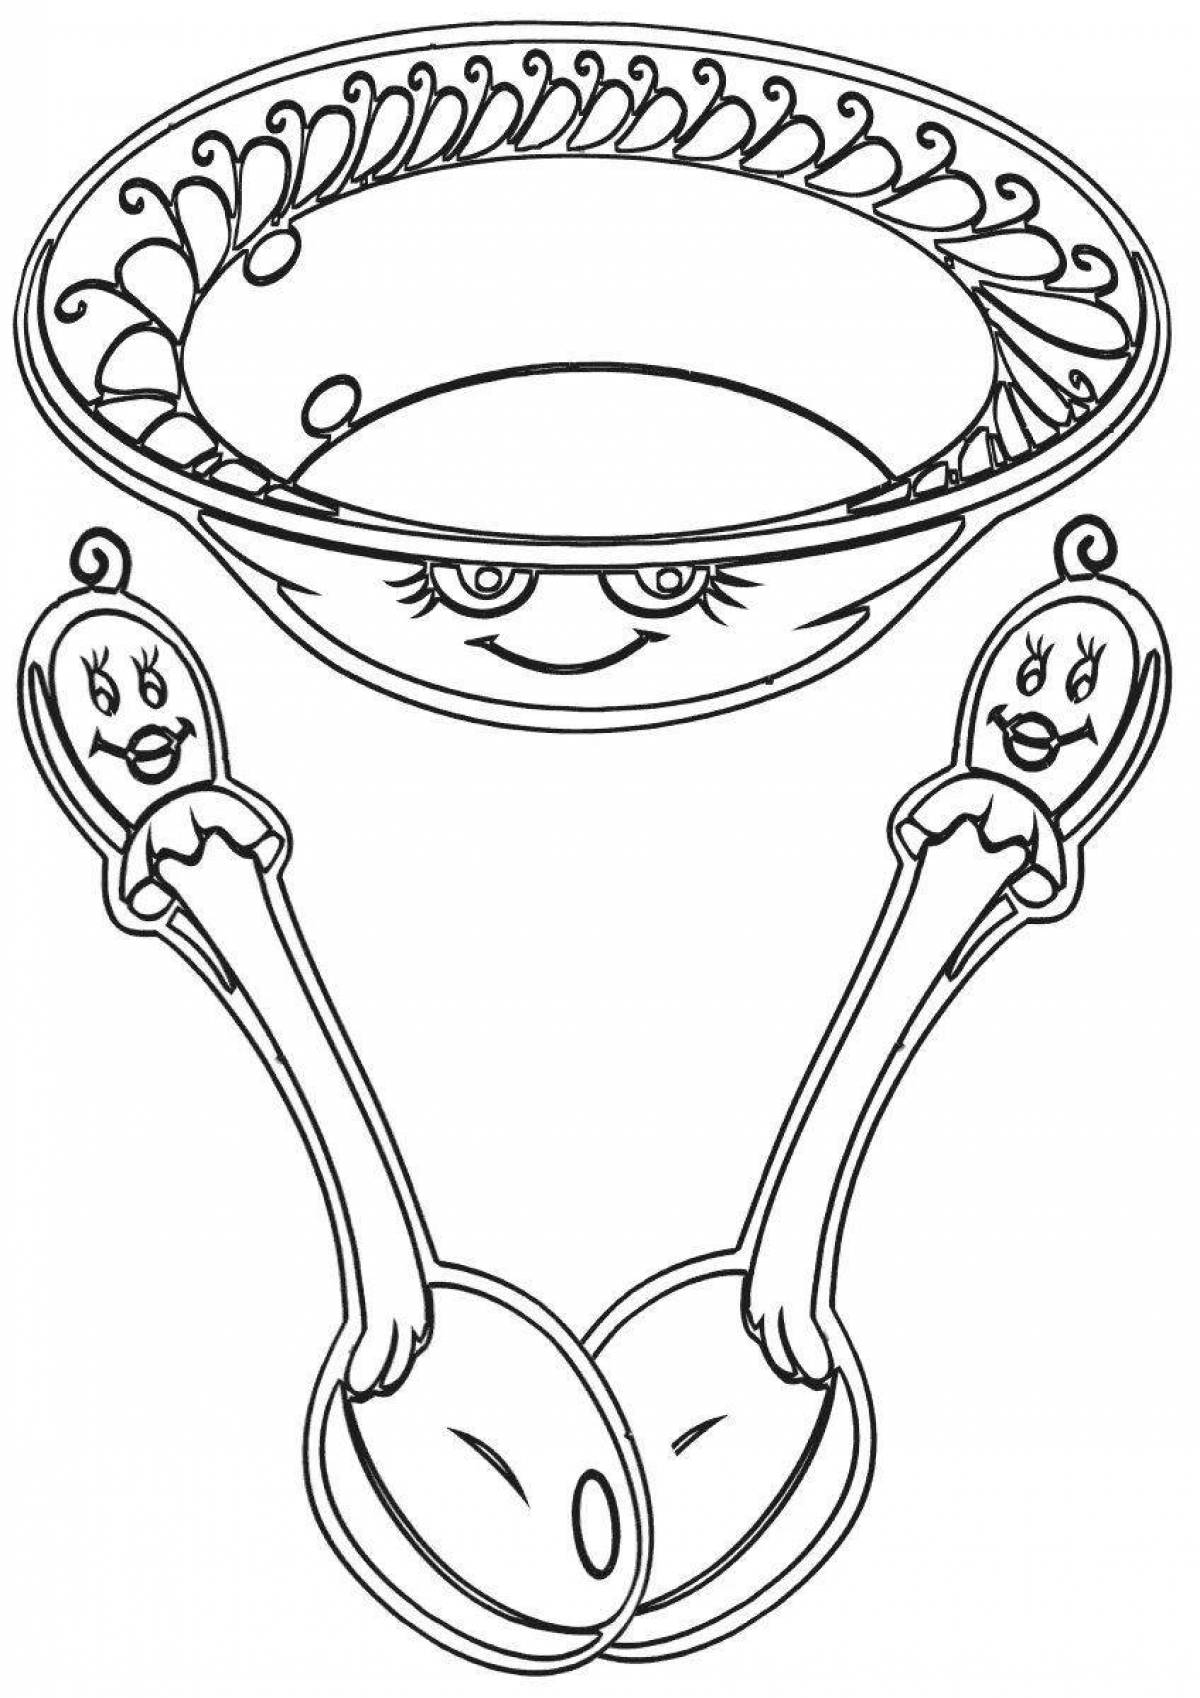 Amazing coloring page of painted spoon